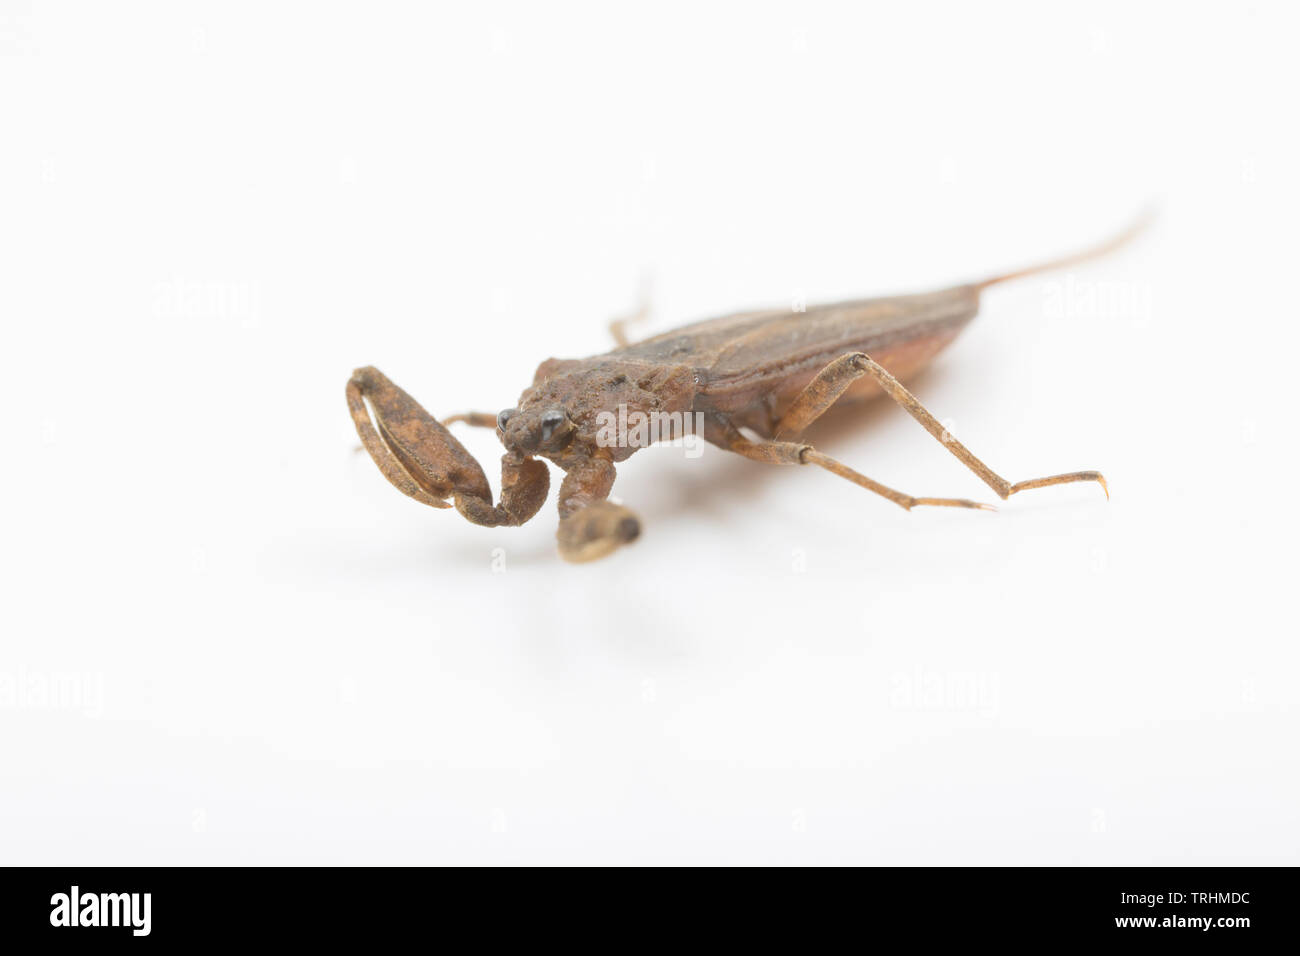 A water scorpion, Nepa cinerea, photographed on a white background. The water scorpion is an aquatic insect that preys on other small aquatic creature Stock Photo